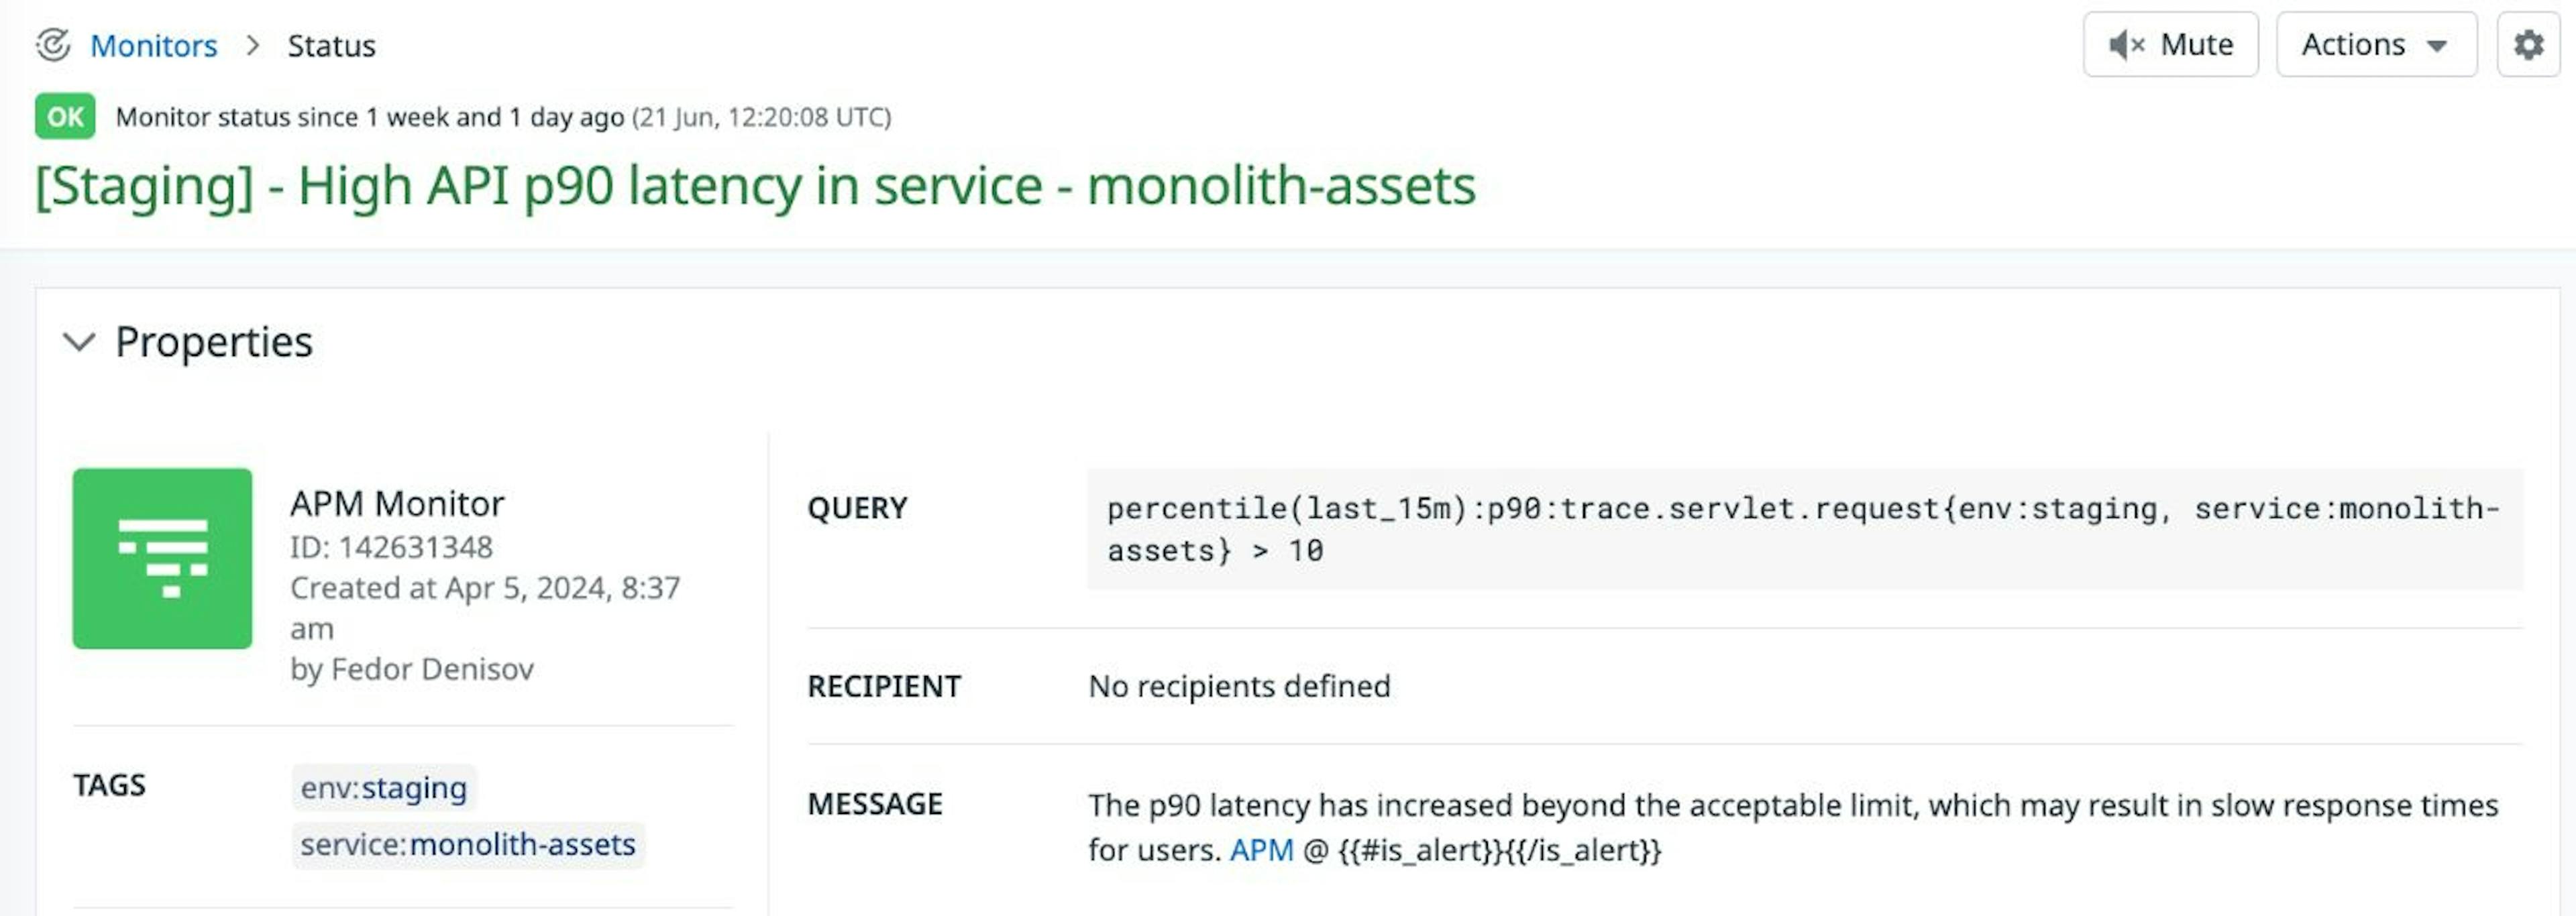 Monitor that uses artificial service 'monolith-assets' in the query